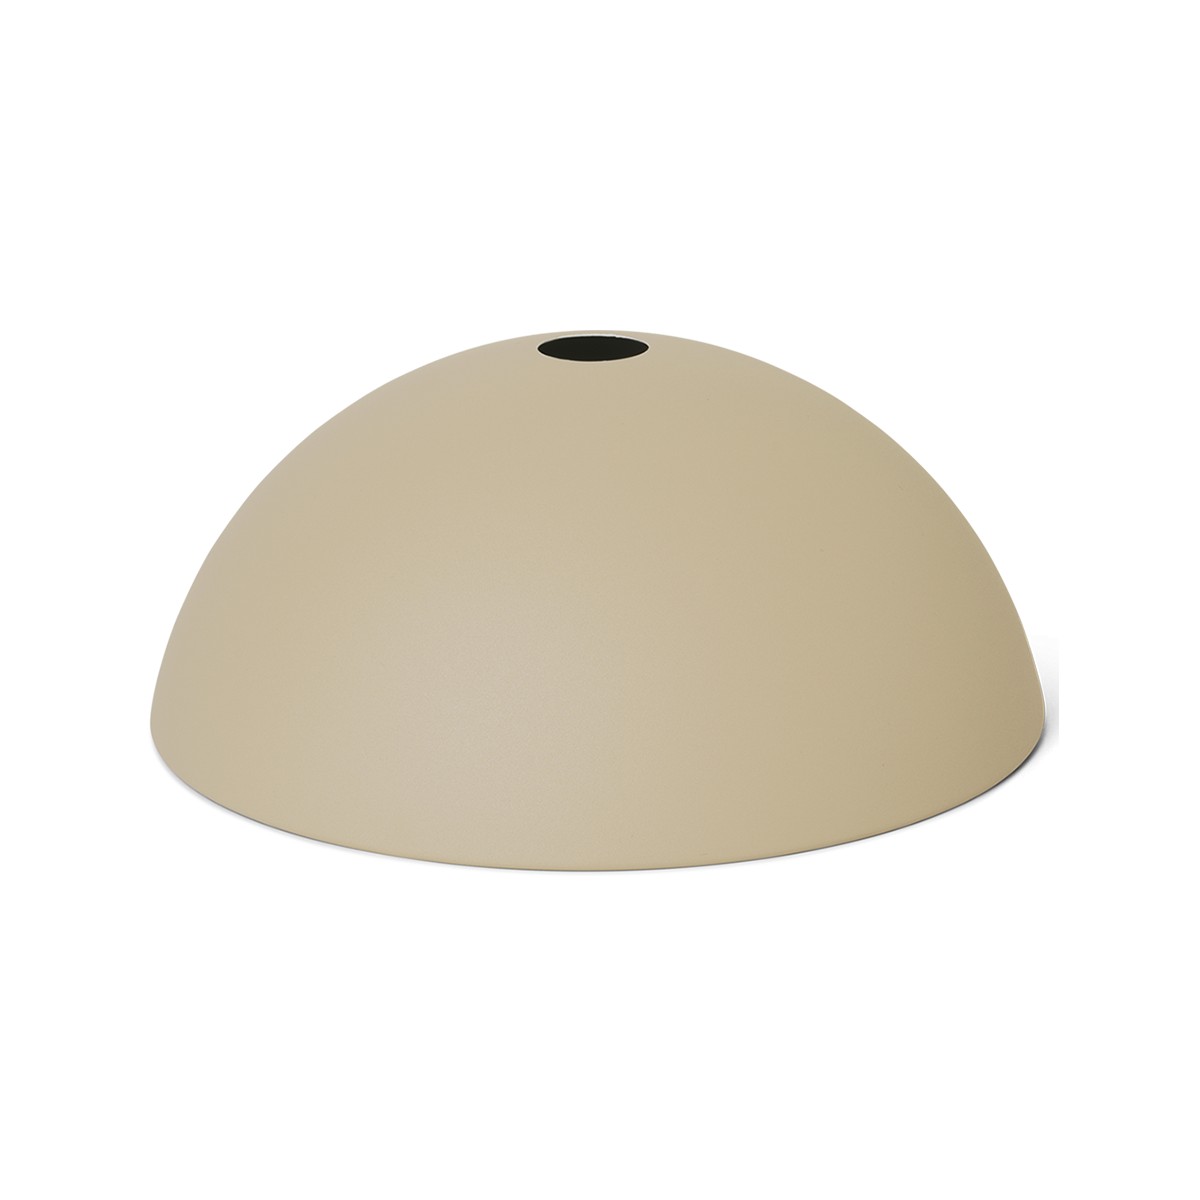 Collect Lighting - cashmere - Dome - abat-jour